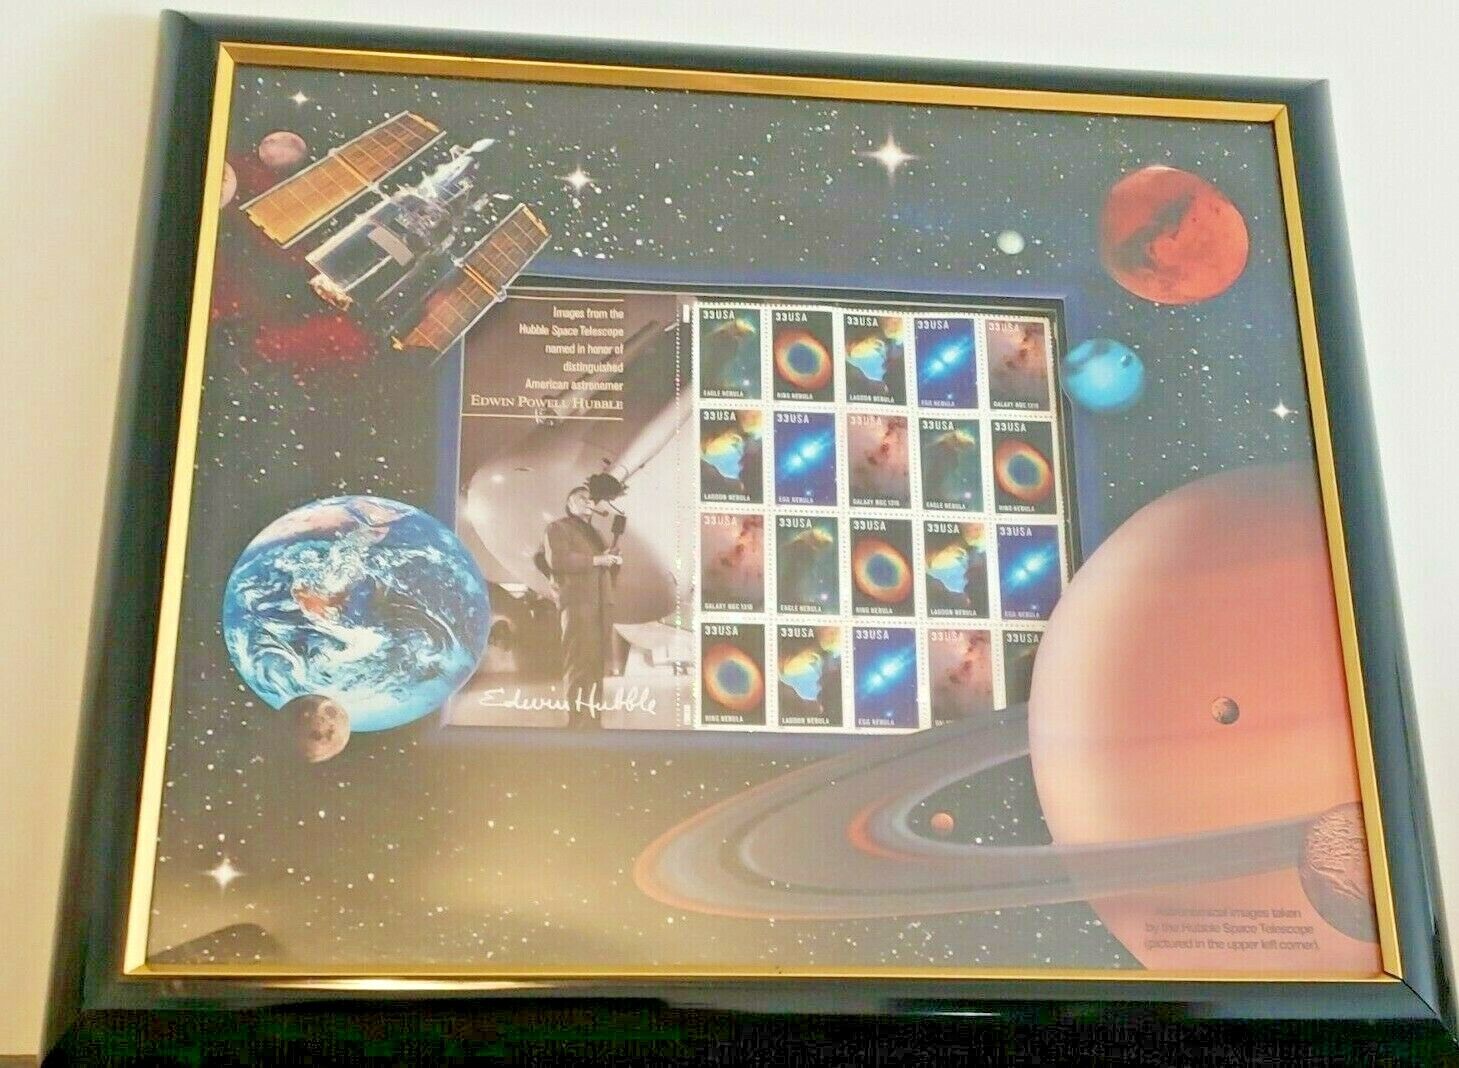 EDWIN POWELL HUBBLE SPACE TELESCOPE FRAME ART USPS 33 cent stamped